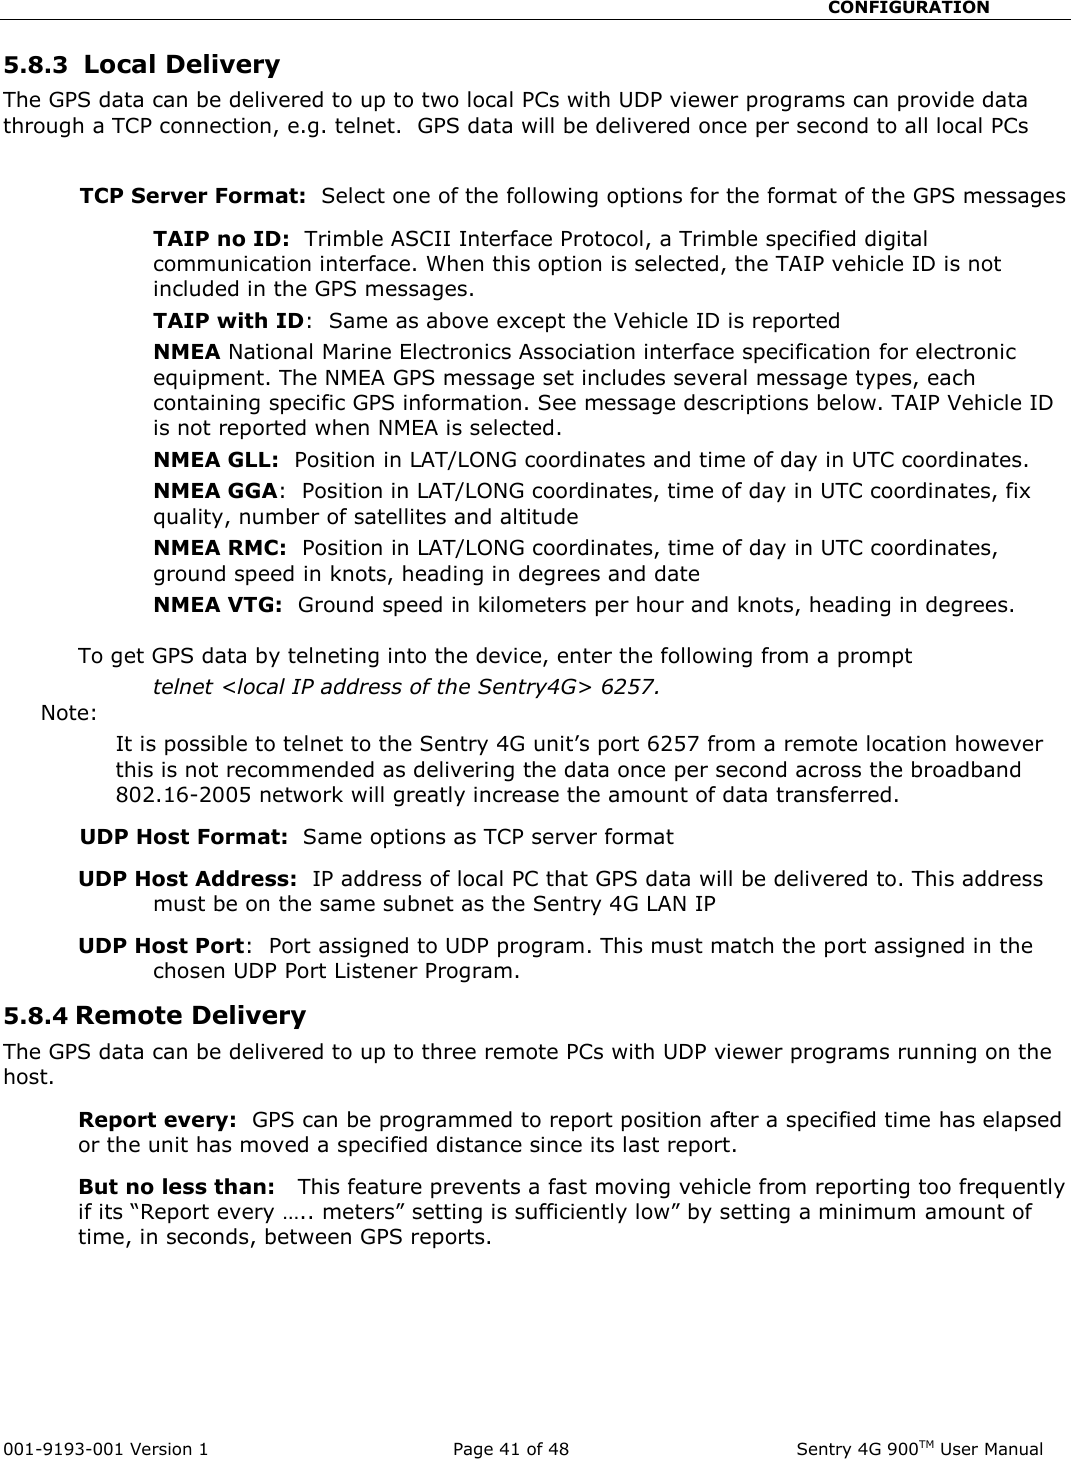                                                       CONFIGURATION  001-9193-001 Version 1              Page 41 of 48               Sentry 4G 900TM User Manual 5.8.3  Local Delivery The GPS data can be delivered to up to two local PCs with UDP viewer programs can provide data through a TCP connection, e.g. telnet.  GPS data will be delivered once per second to all local PCs  TCP Server Format:  Select one of the following options for the format of the GPS messages TAIP no ID:  Trimble ASCII Interface Protocol, a Trimble specified digital communication interface. When this option is selected, the TAIP vehicle ID is not included in the GPS messages.   TAIP with ID:  Same as above except the Vehicle ID is reported NMEA National Marine Electronics Association interface specification for electronic equipment. The NMEA GPS message set includes several message types, each containing specific GPS information. See message descriptions below. TAIP Vehicle ID is not reported when NMEA is selected.   NMEA GLL:  Position in LAT/LONG coordinates and time of day in UTC coordinates.   NMEA GGA:  Position in LAT/LONG coordinates, time of day in UTC coordinates, fix quality, number of satellites and altitude NMEA RMC:  Position in LAT/LONG coordinates, time of day in UTC coordinates, ground speed in knots, heading in degrees and date NMEA VTG:  Ground speed in kilometers per hour and knots, heading in degrees.    To get GPS data by telneting into the device, enter the following from a prompt  telnet &lt;local IP address of the Sentry4G&gt; 6257.   Note:   It is possible to telnet to the Sentry 4G unit’s port 6257 from a remote location however this is not recommended as delivering the data once per second across the broadband 802.16-2005 network will greatly increase the amount of data transferred.  UDP Host Format:  Same options as TCP server format  UDP Host Address:  IP address of local PC that GPS data will be delivered to. This address must be on the same subnet as the Sentry 4G LAN IP  UDP Host Port:  Port assigned to UDP program. This must match the port assigned in the chosen UDP Port Listener Program.    5.8.4 Remote Delivery    The GPS data can be delivered to up to three remote PCs with UDP viewer programs running on the host. Report every:  GPS can be programmed to report position after a specified time has elapsed or the unit has moved a specified distance since its last report.   But no less than:   This feature prevents a fast moving vehicle from reporting too frequently if its “Report every ….. meters” setting is sufficiently low” by setting a minimum amount of time, in seconds, between GPS reports.    